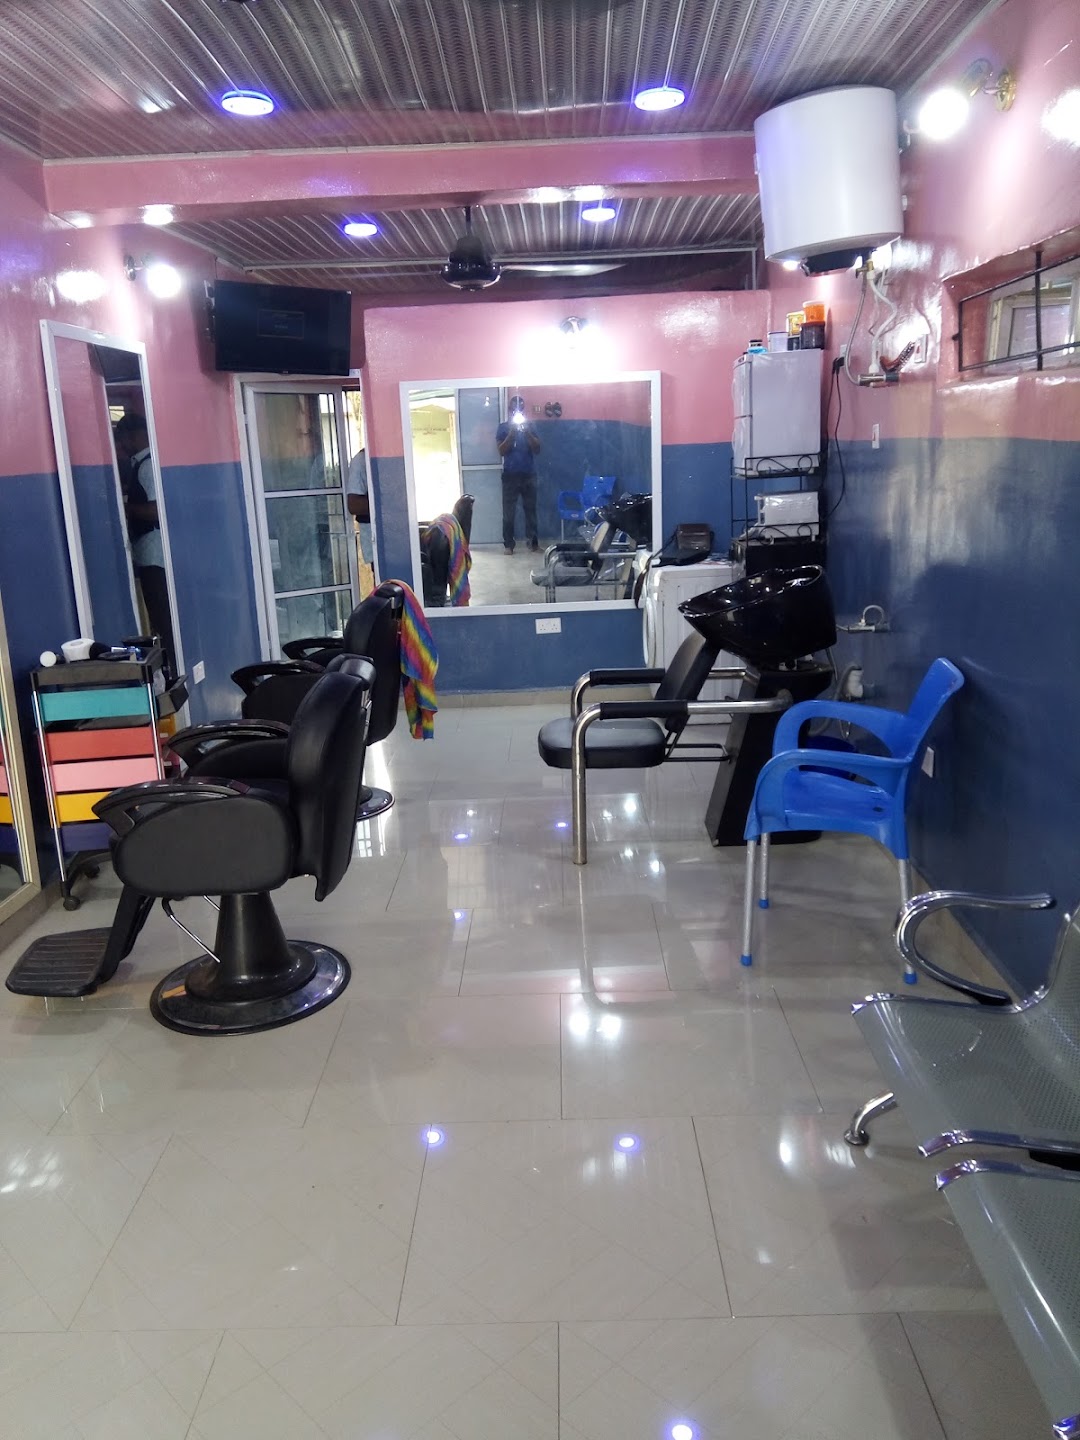 Exquisite Barbers (The Hygienic Barbers)